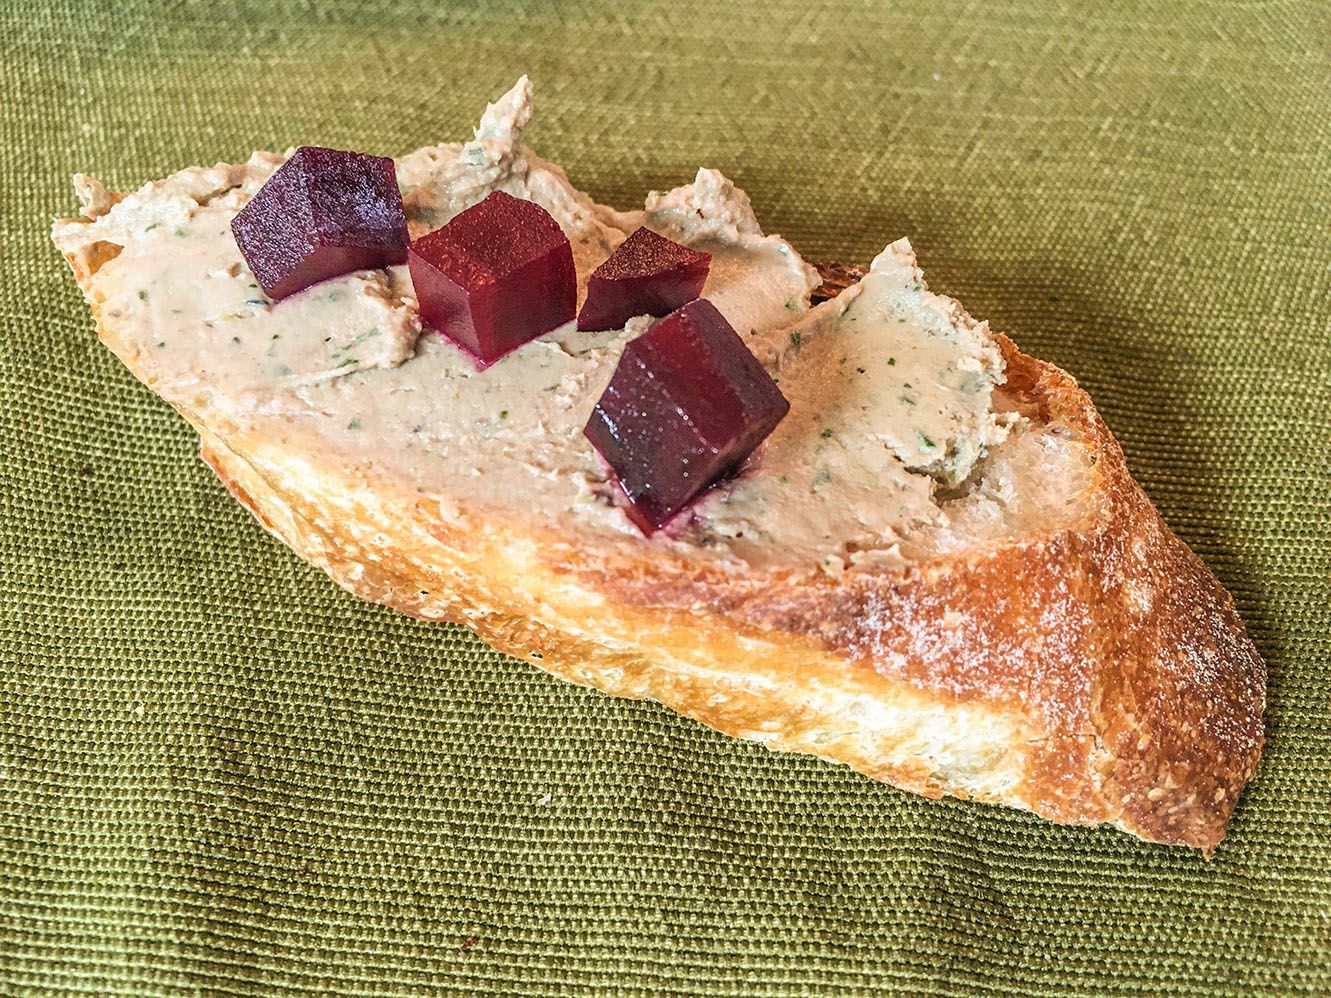 A slice of baguette, topped with pâté and small deep red cubes of pickled beets.